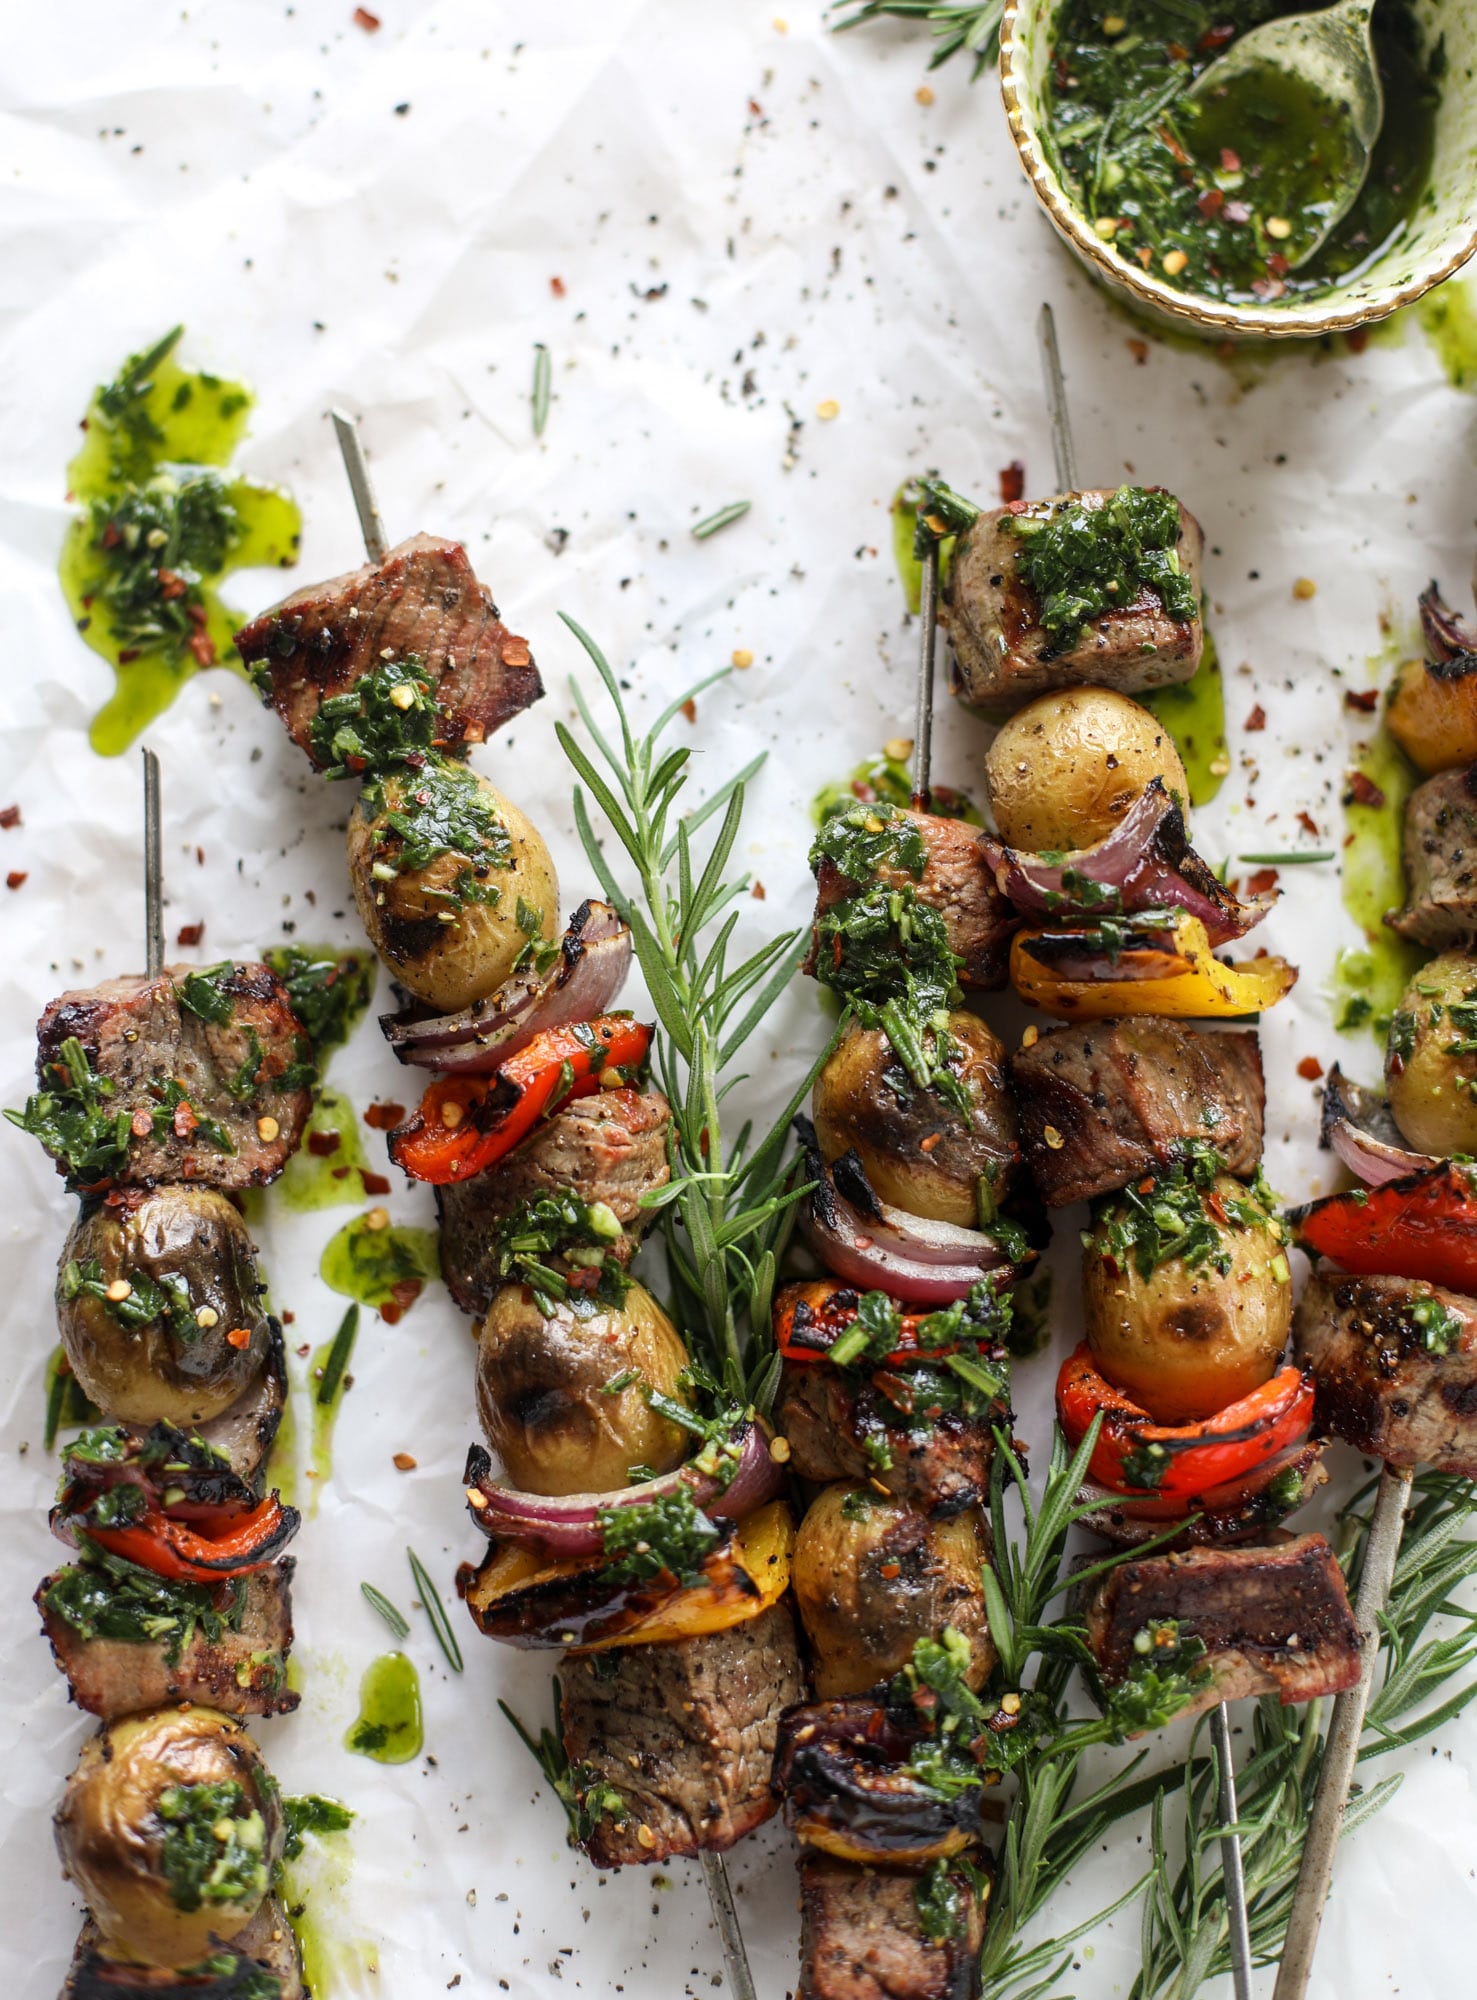 These steak and potato skewers are a complete meal in one! Serve with chimichurri for the ultimate flavor explosion. These are delicious!